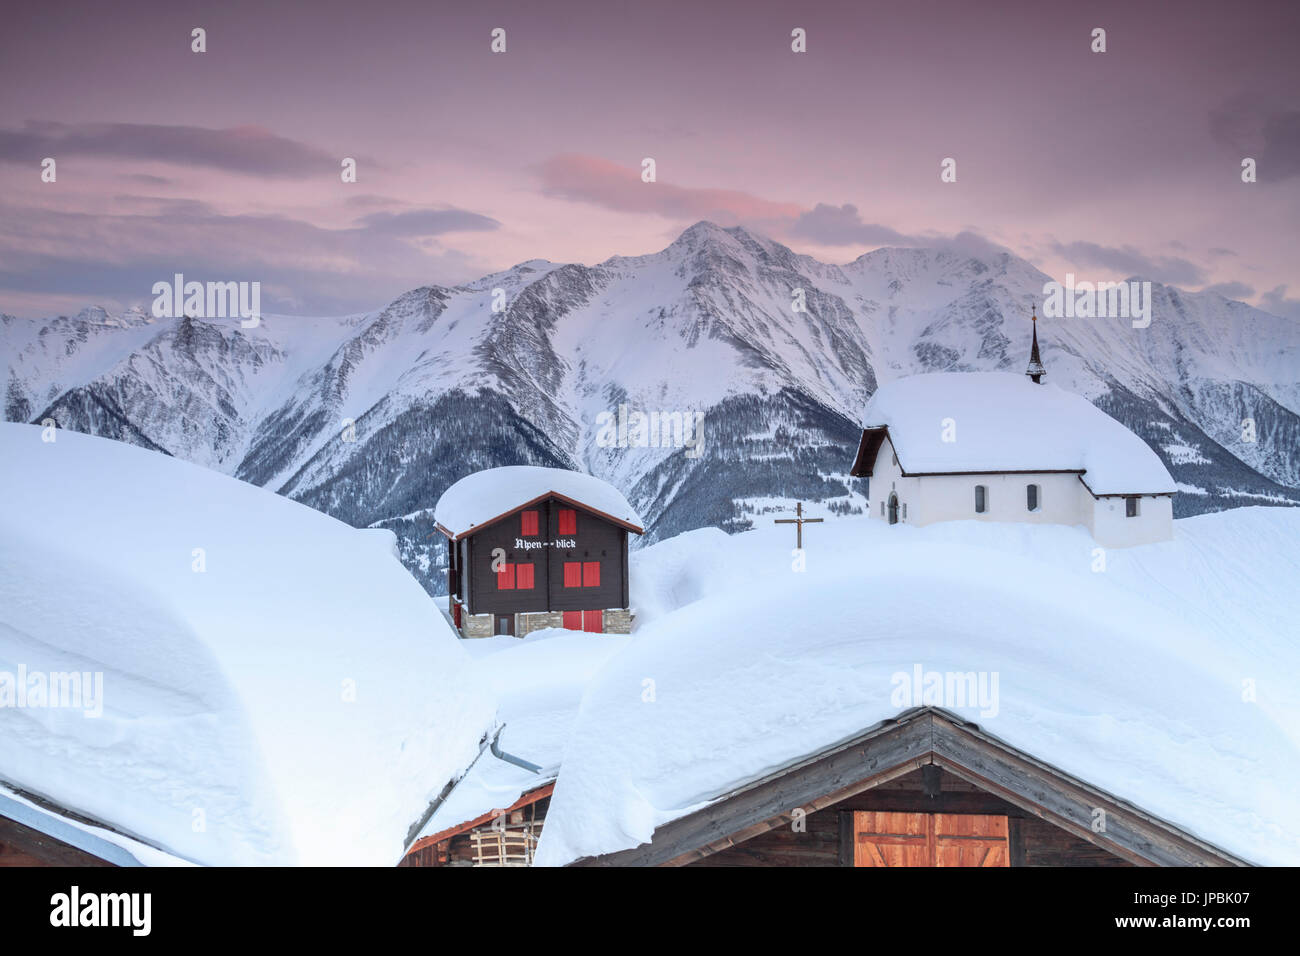 Pink sky at sunset frames the snowy mountain huts and church Bettmeralp district of Raron canton of Valais Switzerland Europe Stock Photo